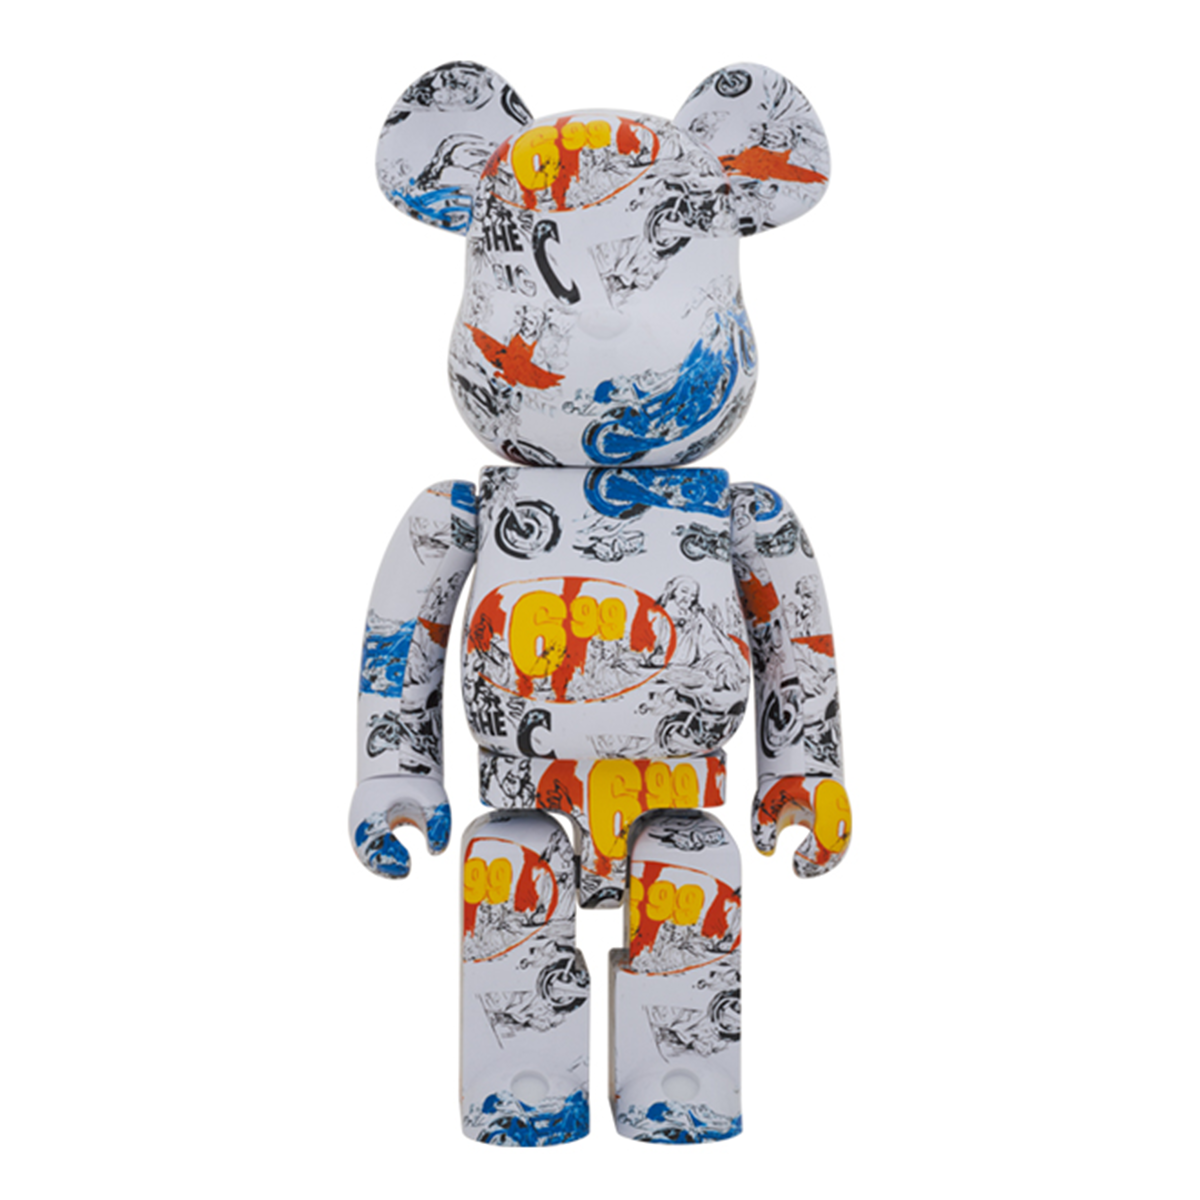 Bearbrick 1000% Unboxing & Review - Andy Warhol Double Mona Lisa Multicolor  (Be@rbrick) 